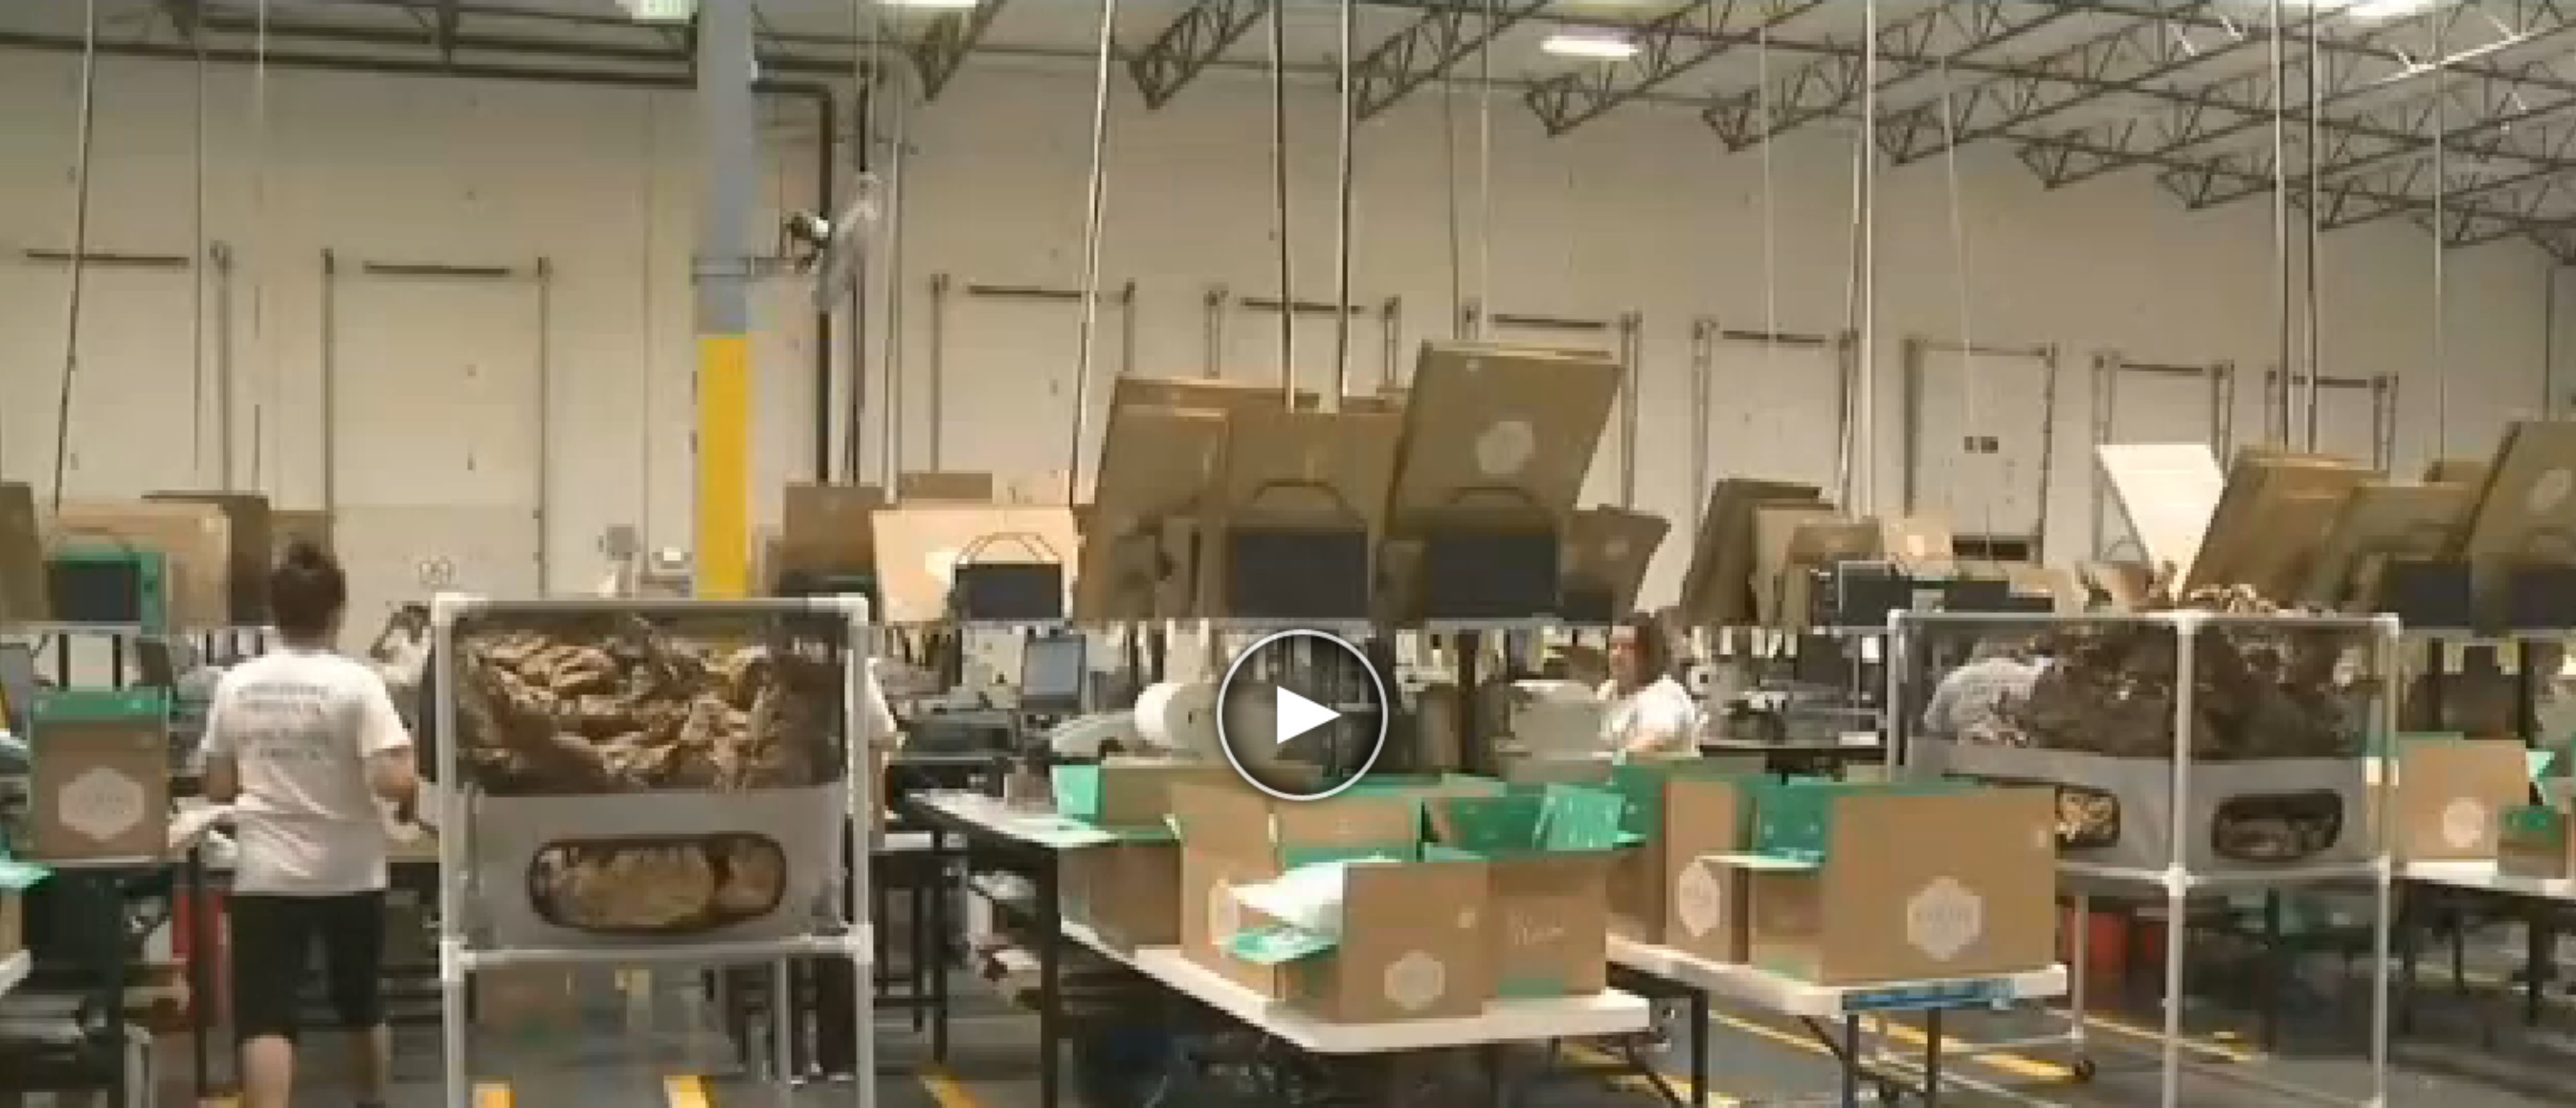 Thrive Market Opens New Distribution Center, Brings 400 New Jobs to Reno Area